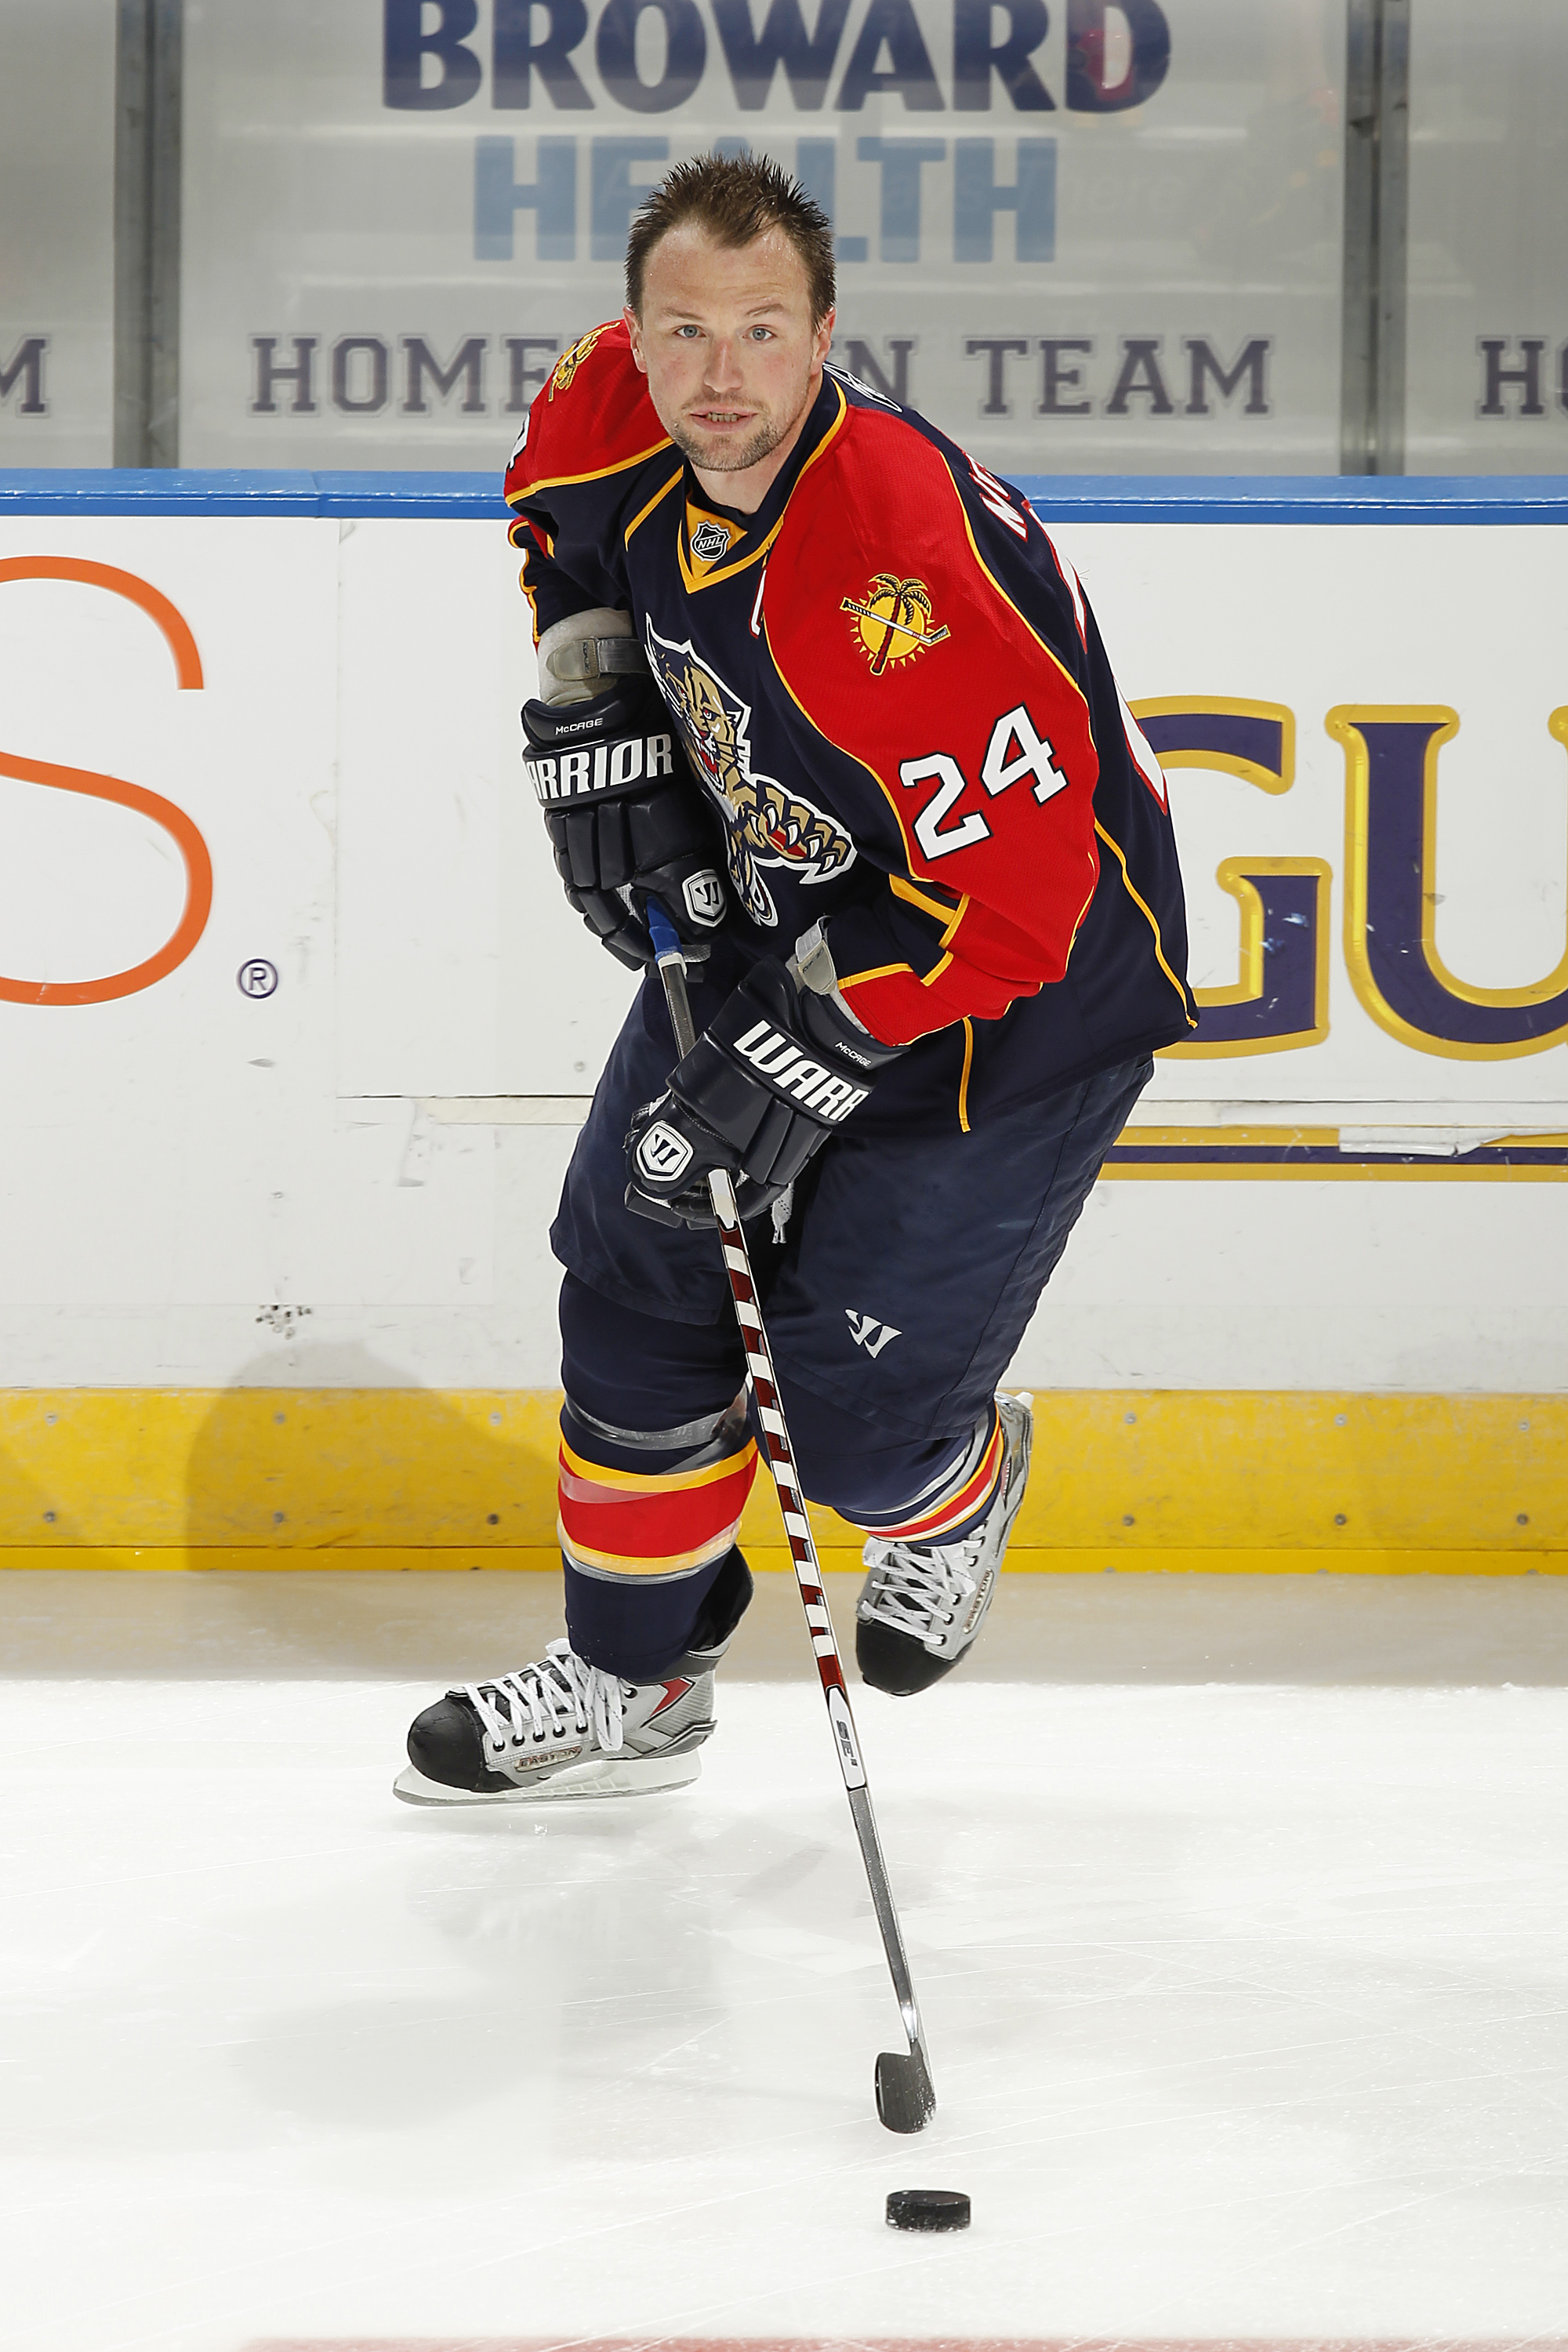 SUNRISE, FL - NOVEMBER 3: Bryan McCabe #24 of the Florida Panthers skates with the puck prior to the game against the Atlanta Thrashers on November 3, 2010 at the BankAtlantic Center in Sunrise, Florida. (Photo by Joel Auerbach/Getty Images)